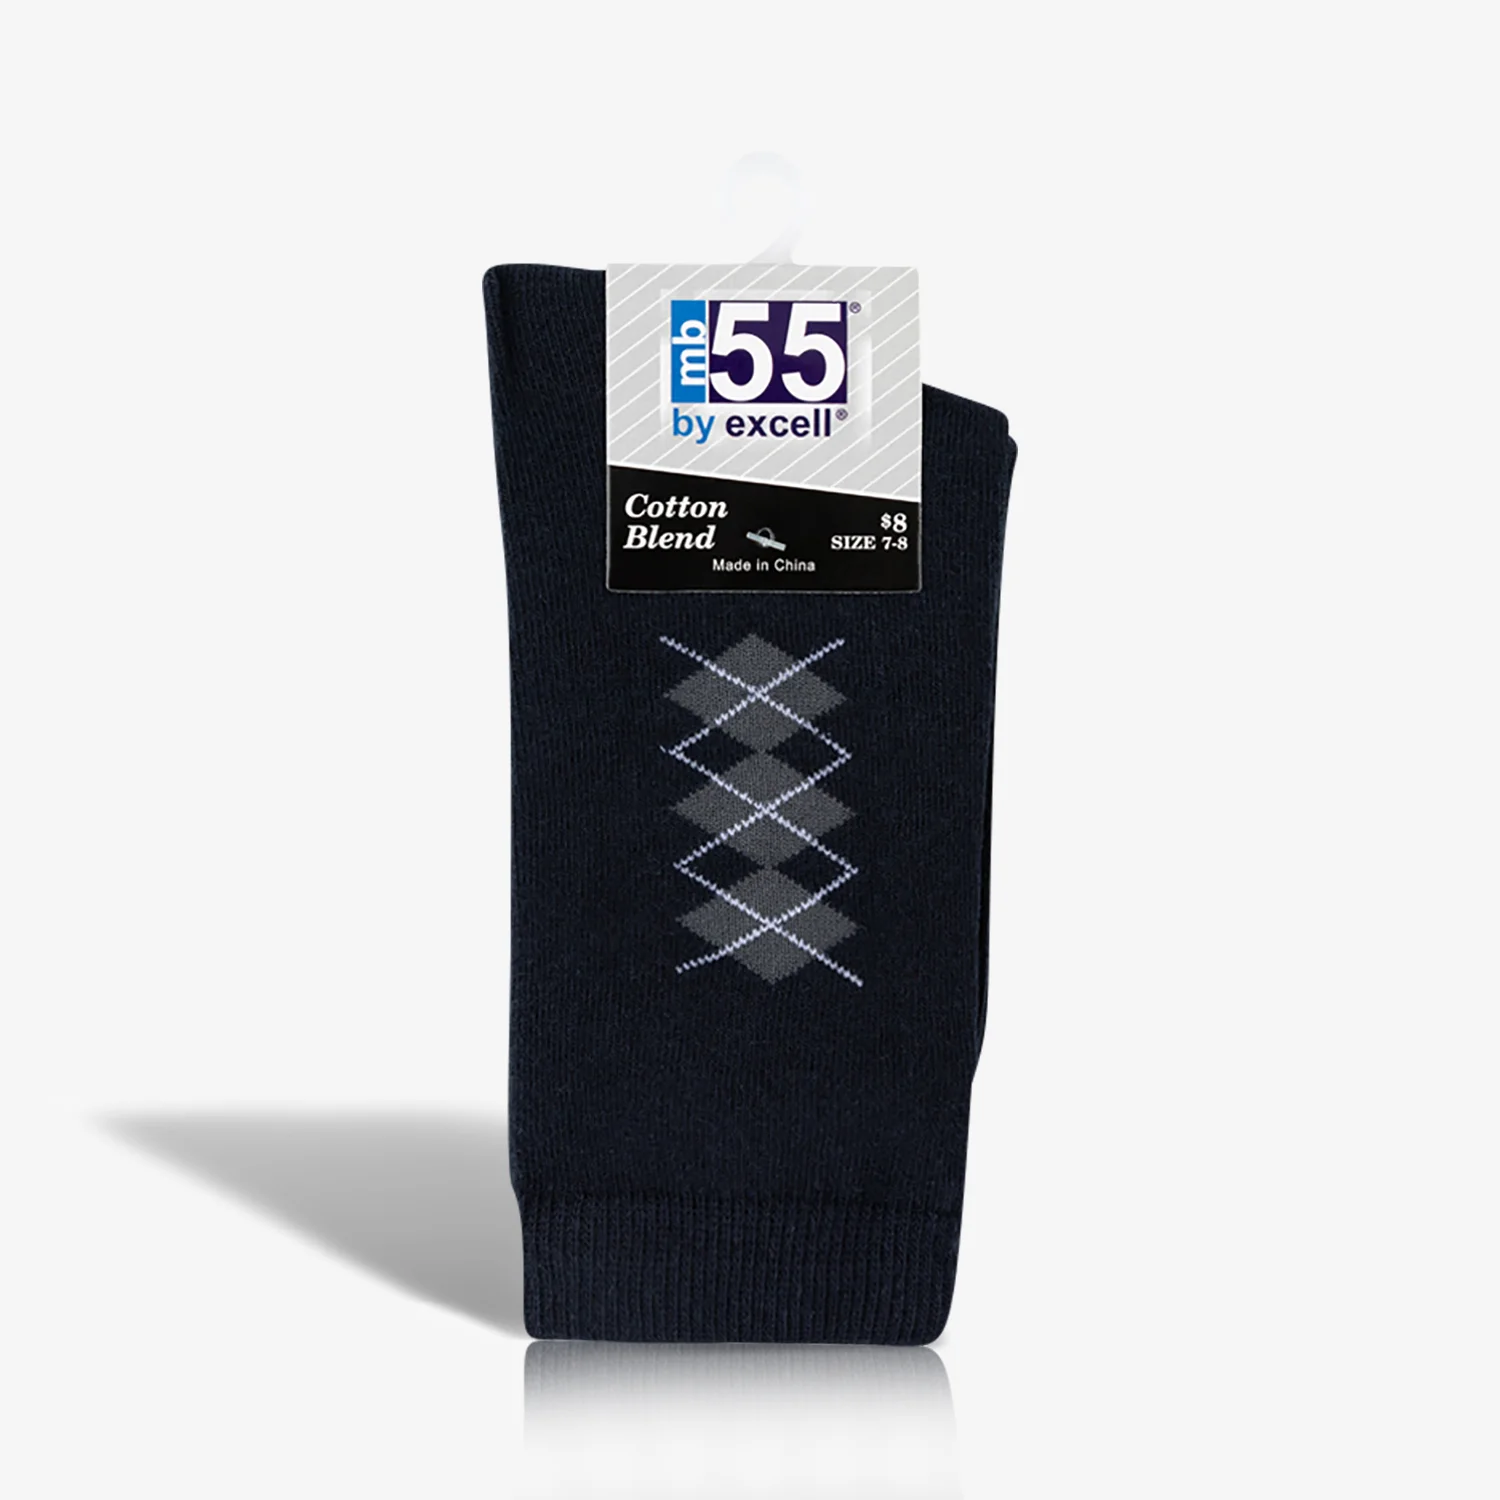 Boys dress Cotton Blend navy socks with a white polka dot design, made from a soft cotton blend.